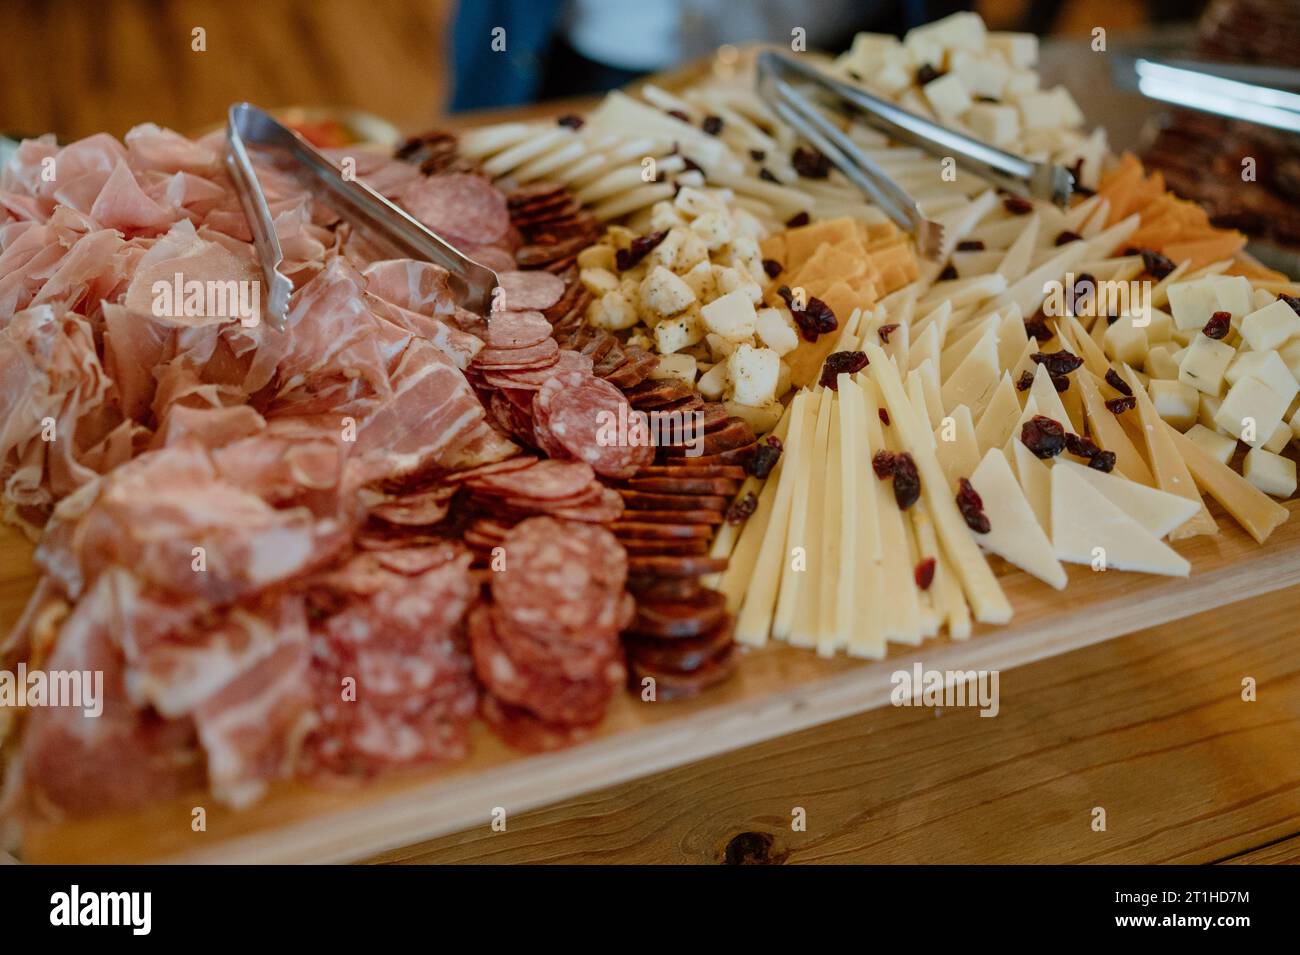 A wooden serving platter filled with a variety of meats and cheeses Stock Photo